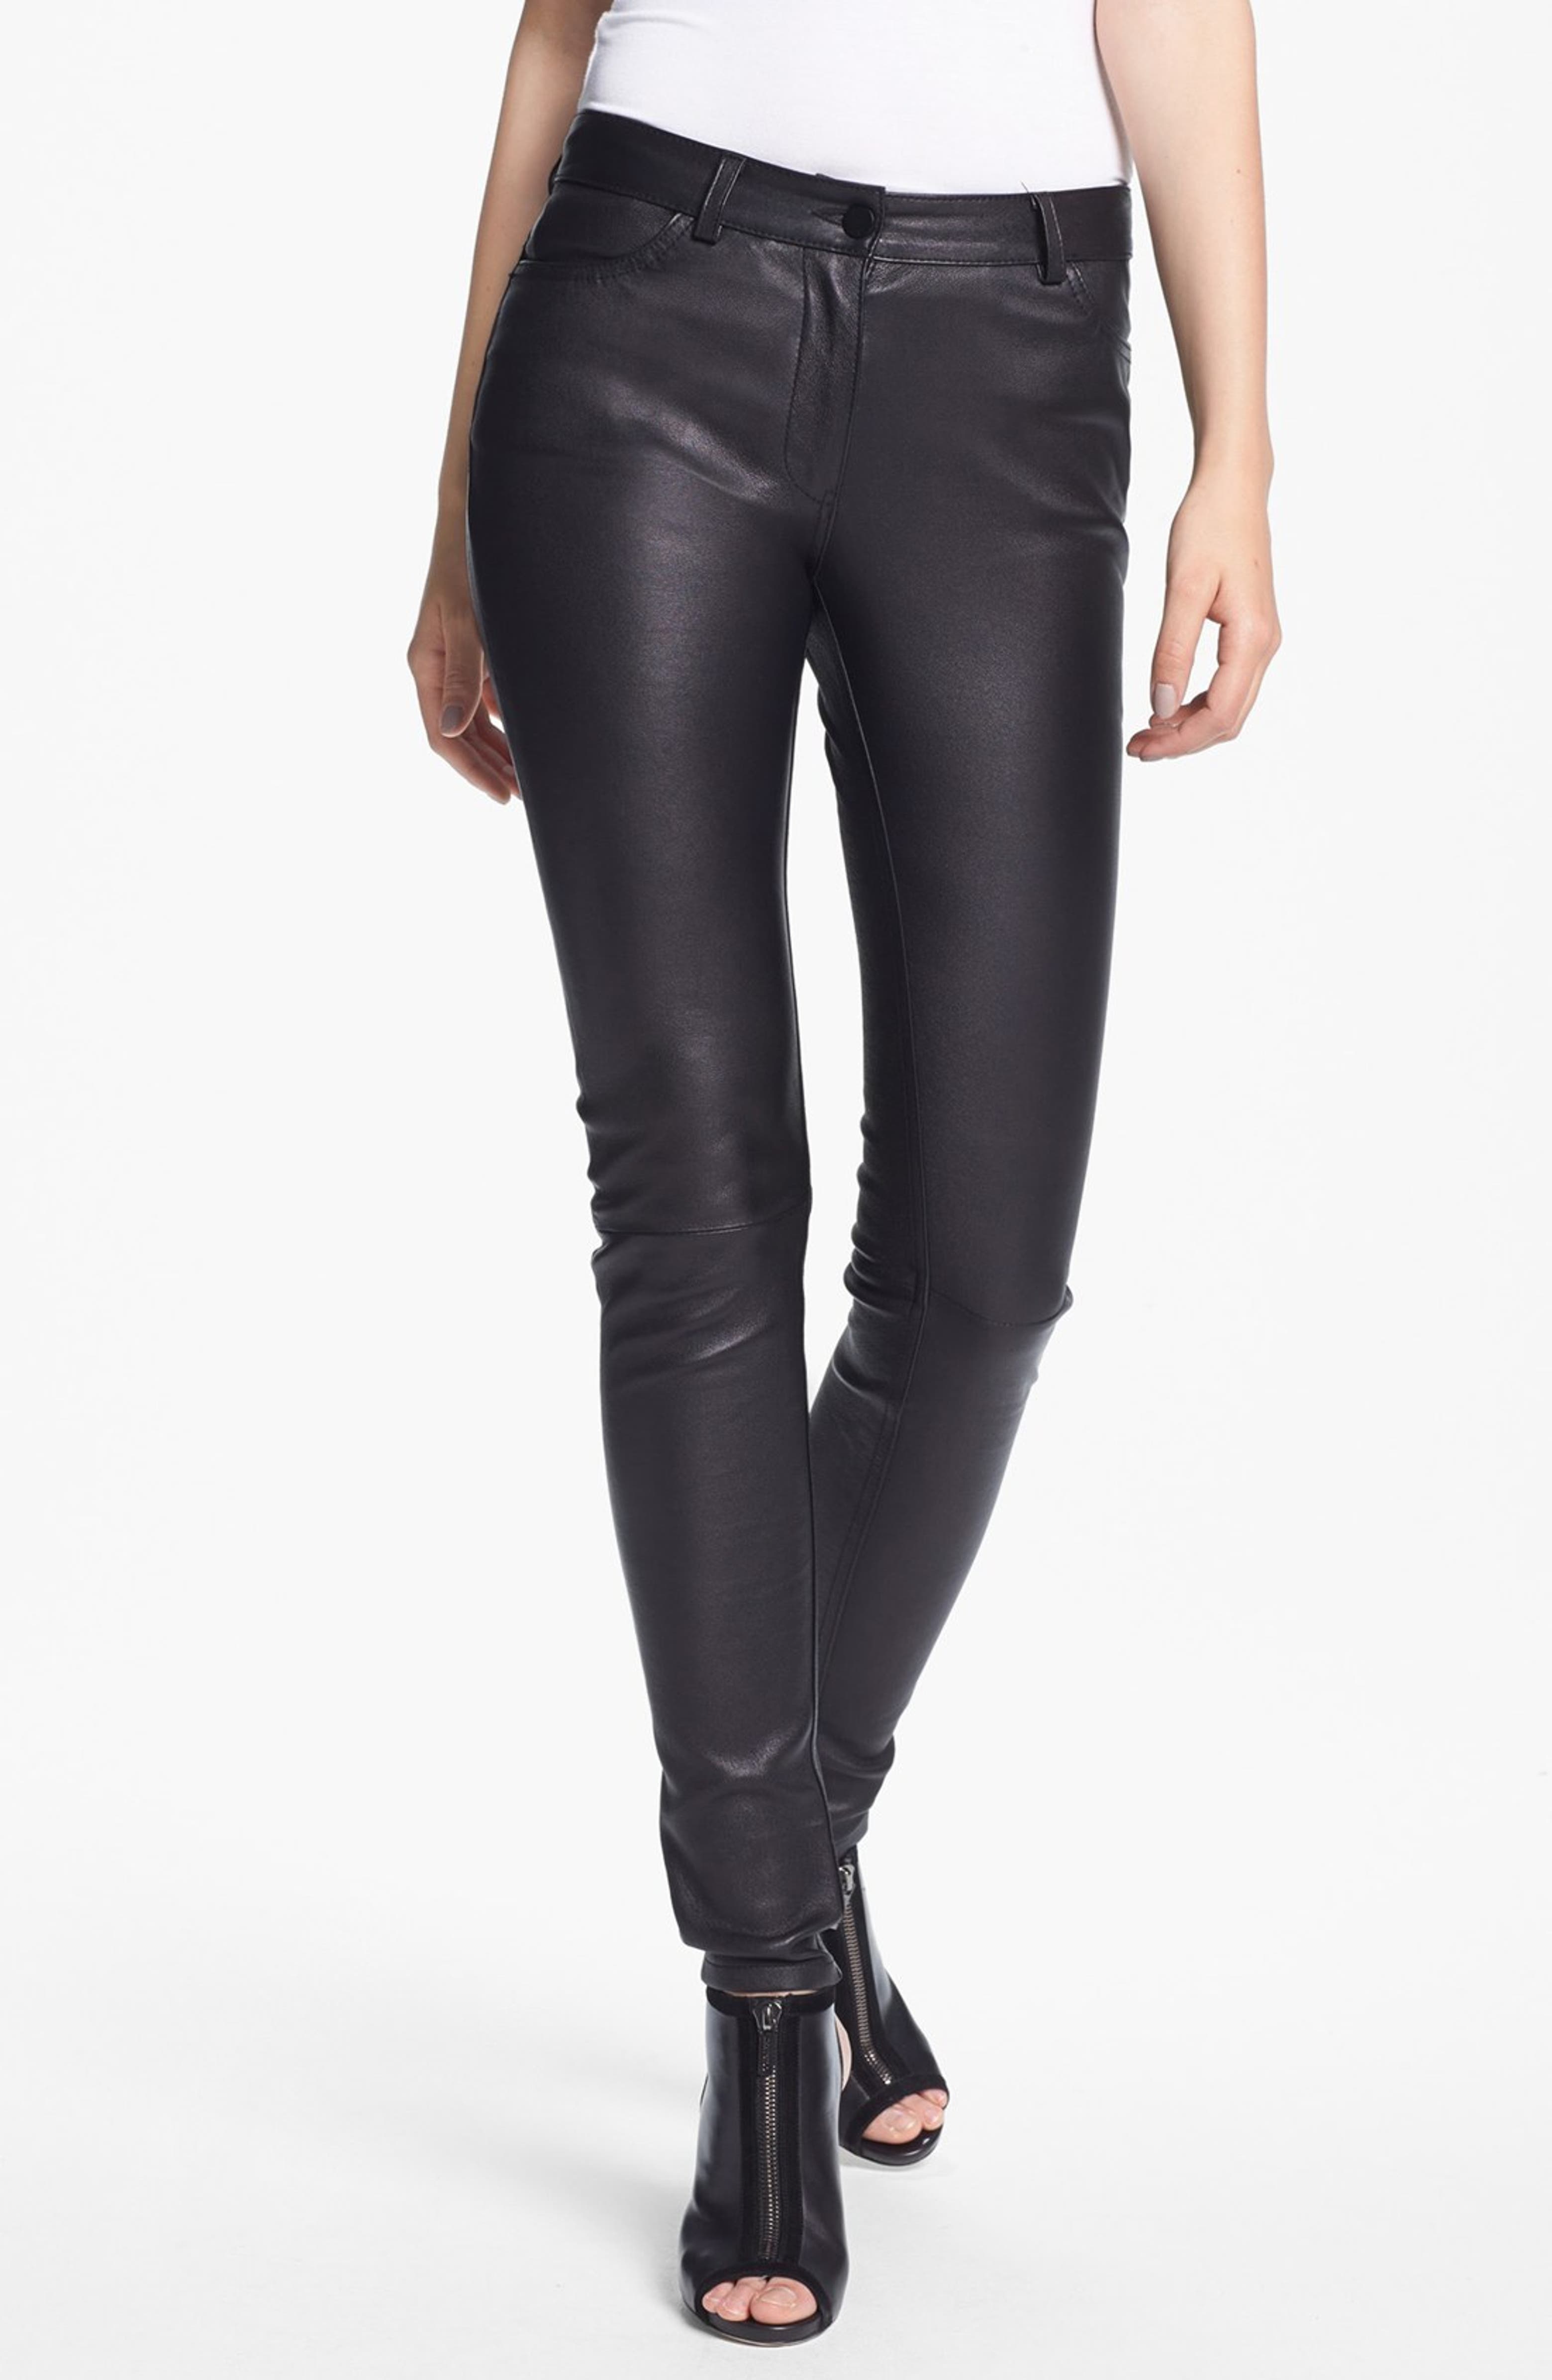 T by Alexander Wang Top & Stretch Leather Pants | Nordstrom